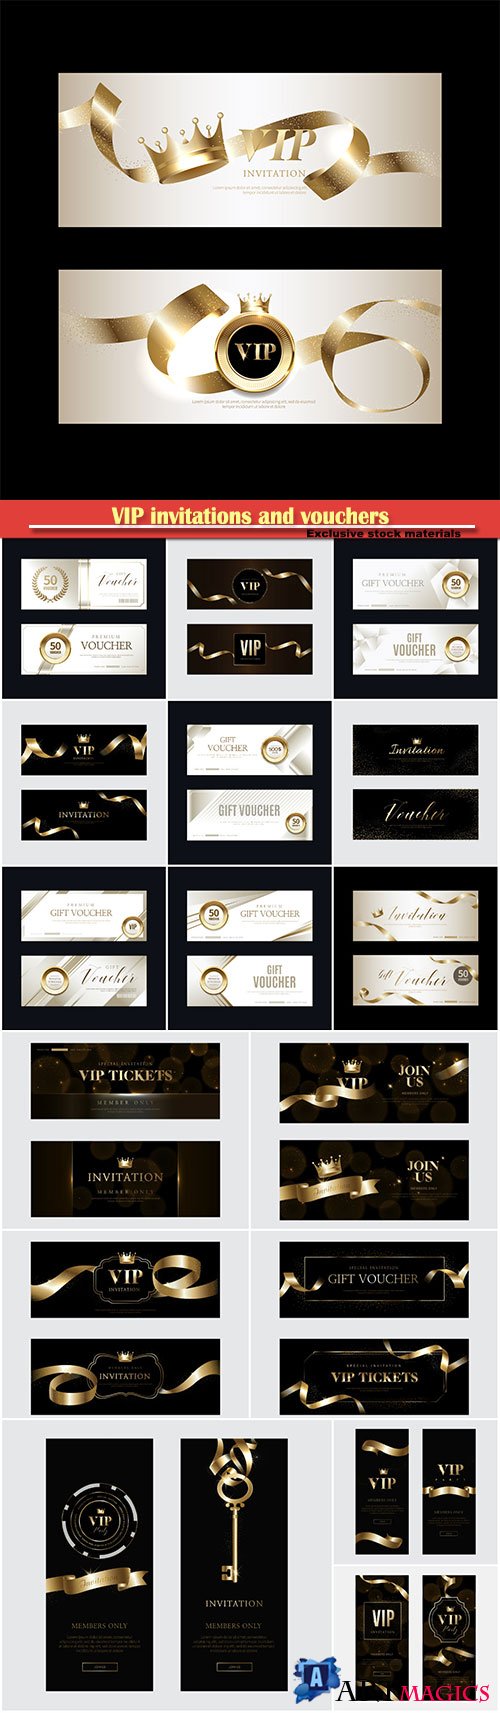 VIP invitations and vouchers with gold decor elements